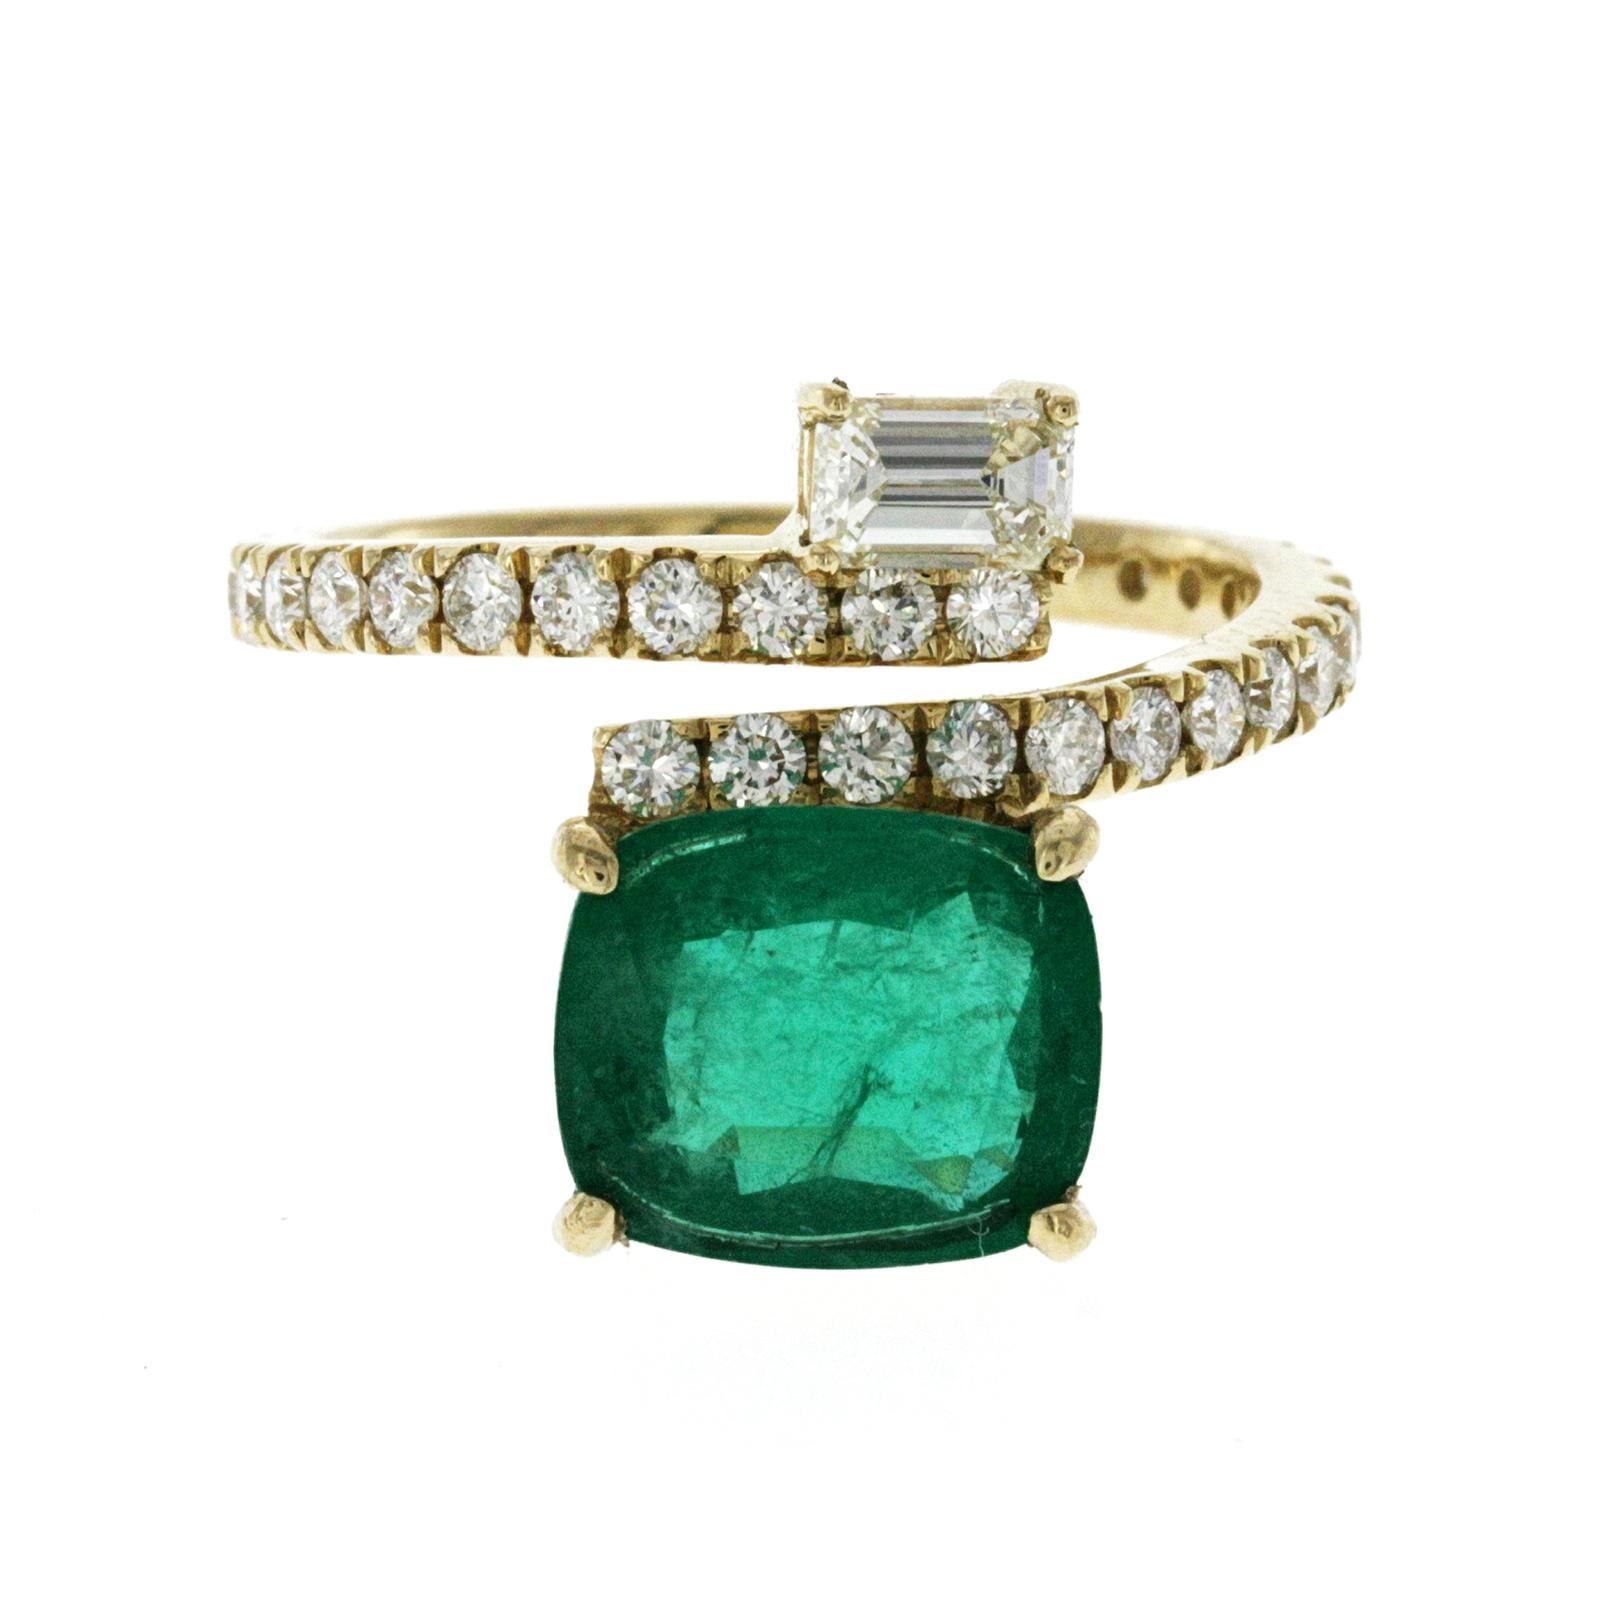 2.69 CT Zambian Emerald & 0.90 CT Diamonds in 14K Yellow Gold Engagement Ring In New Condition For Sale In Los Angeles, CA